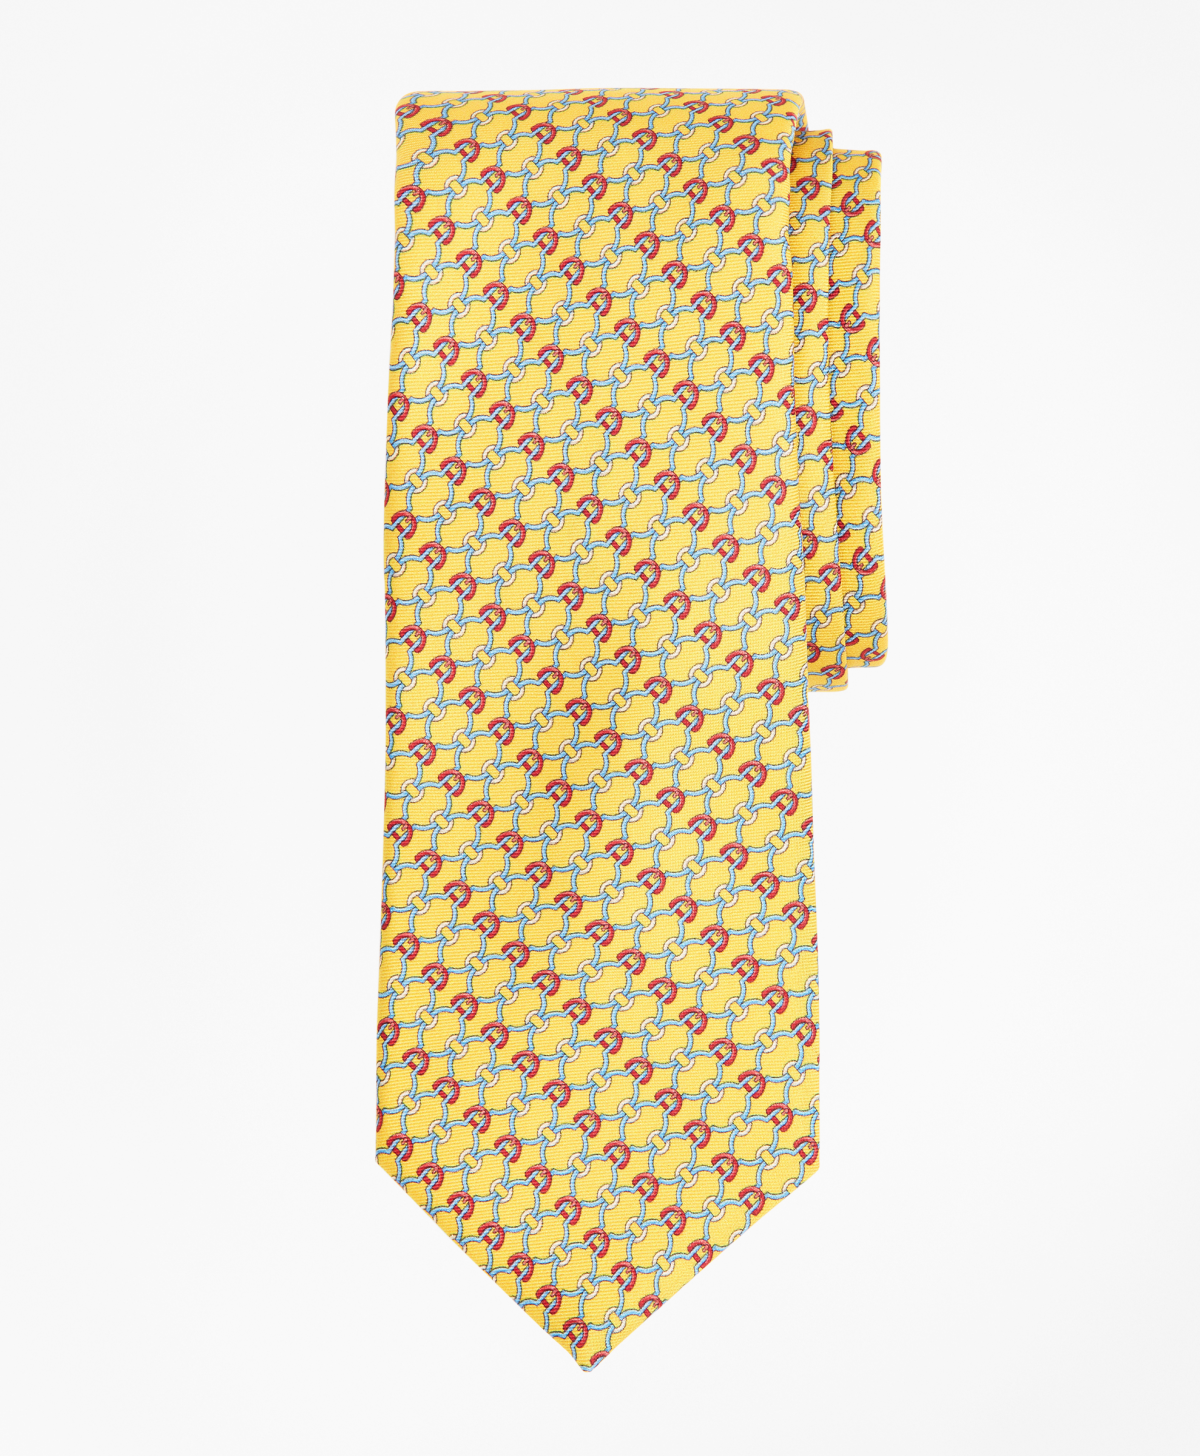 Connected Bits Print Tie